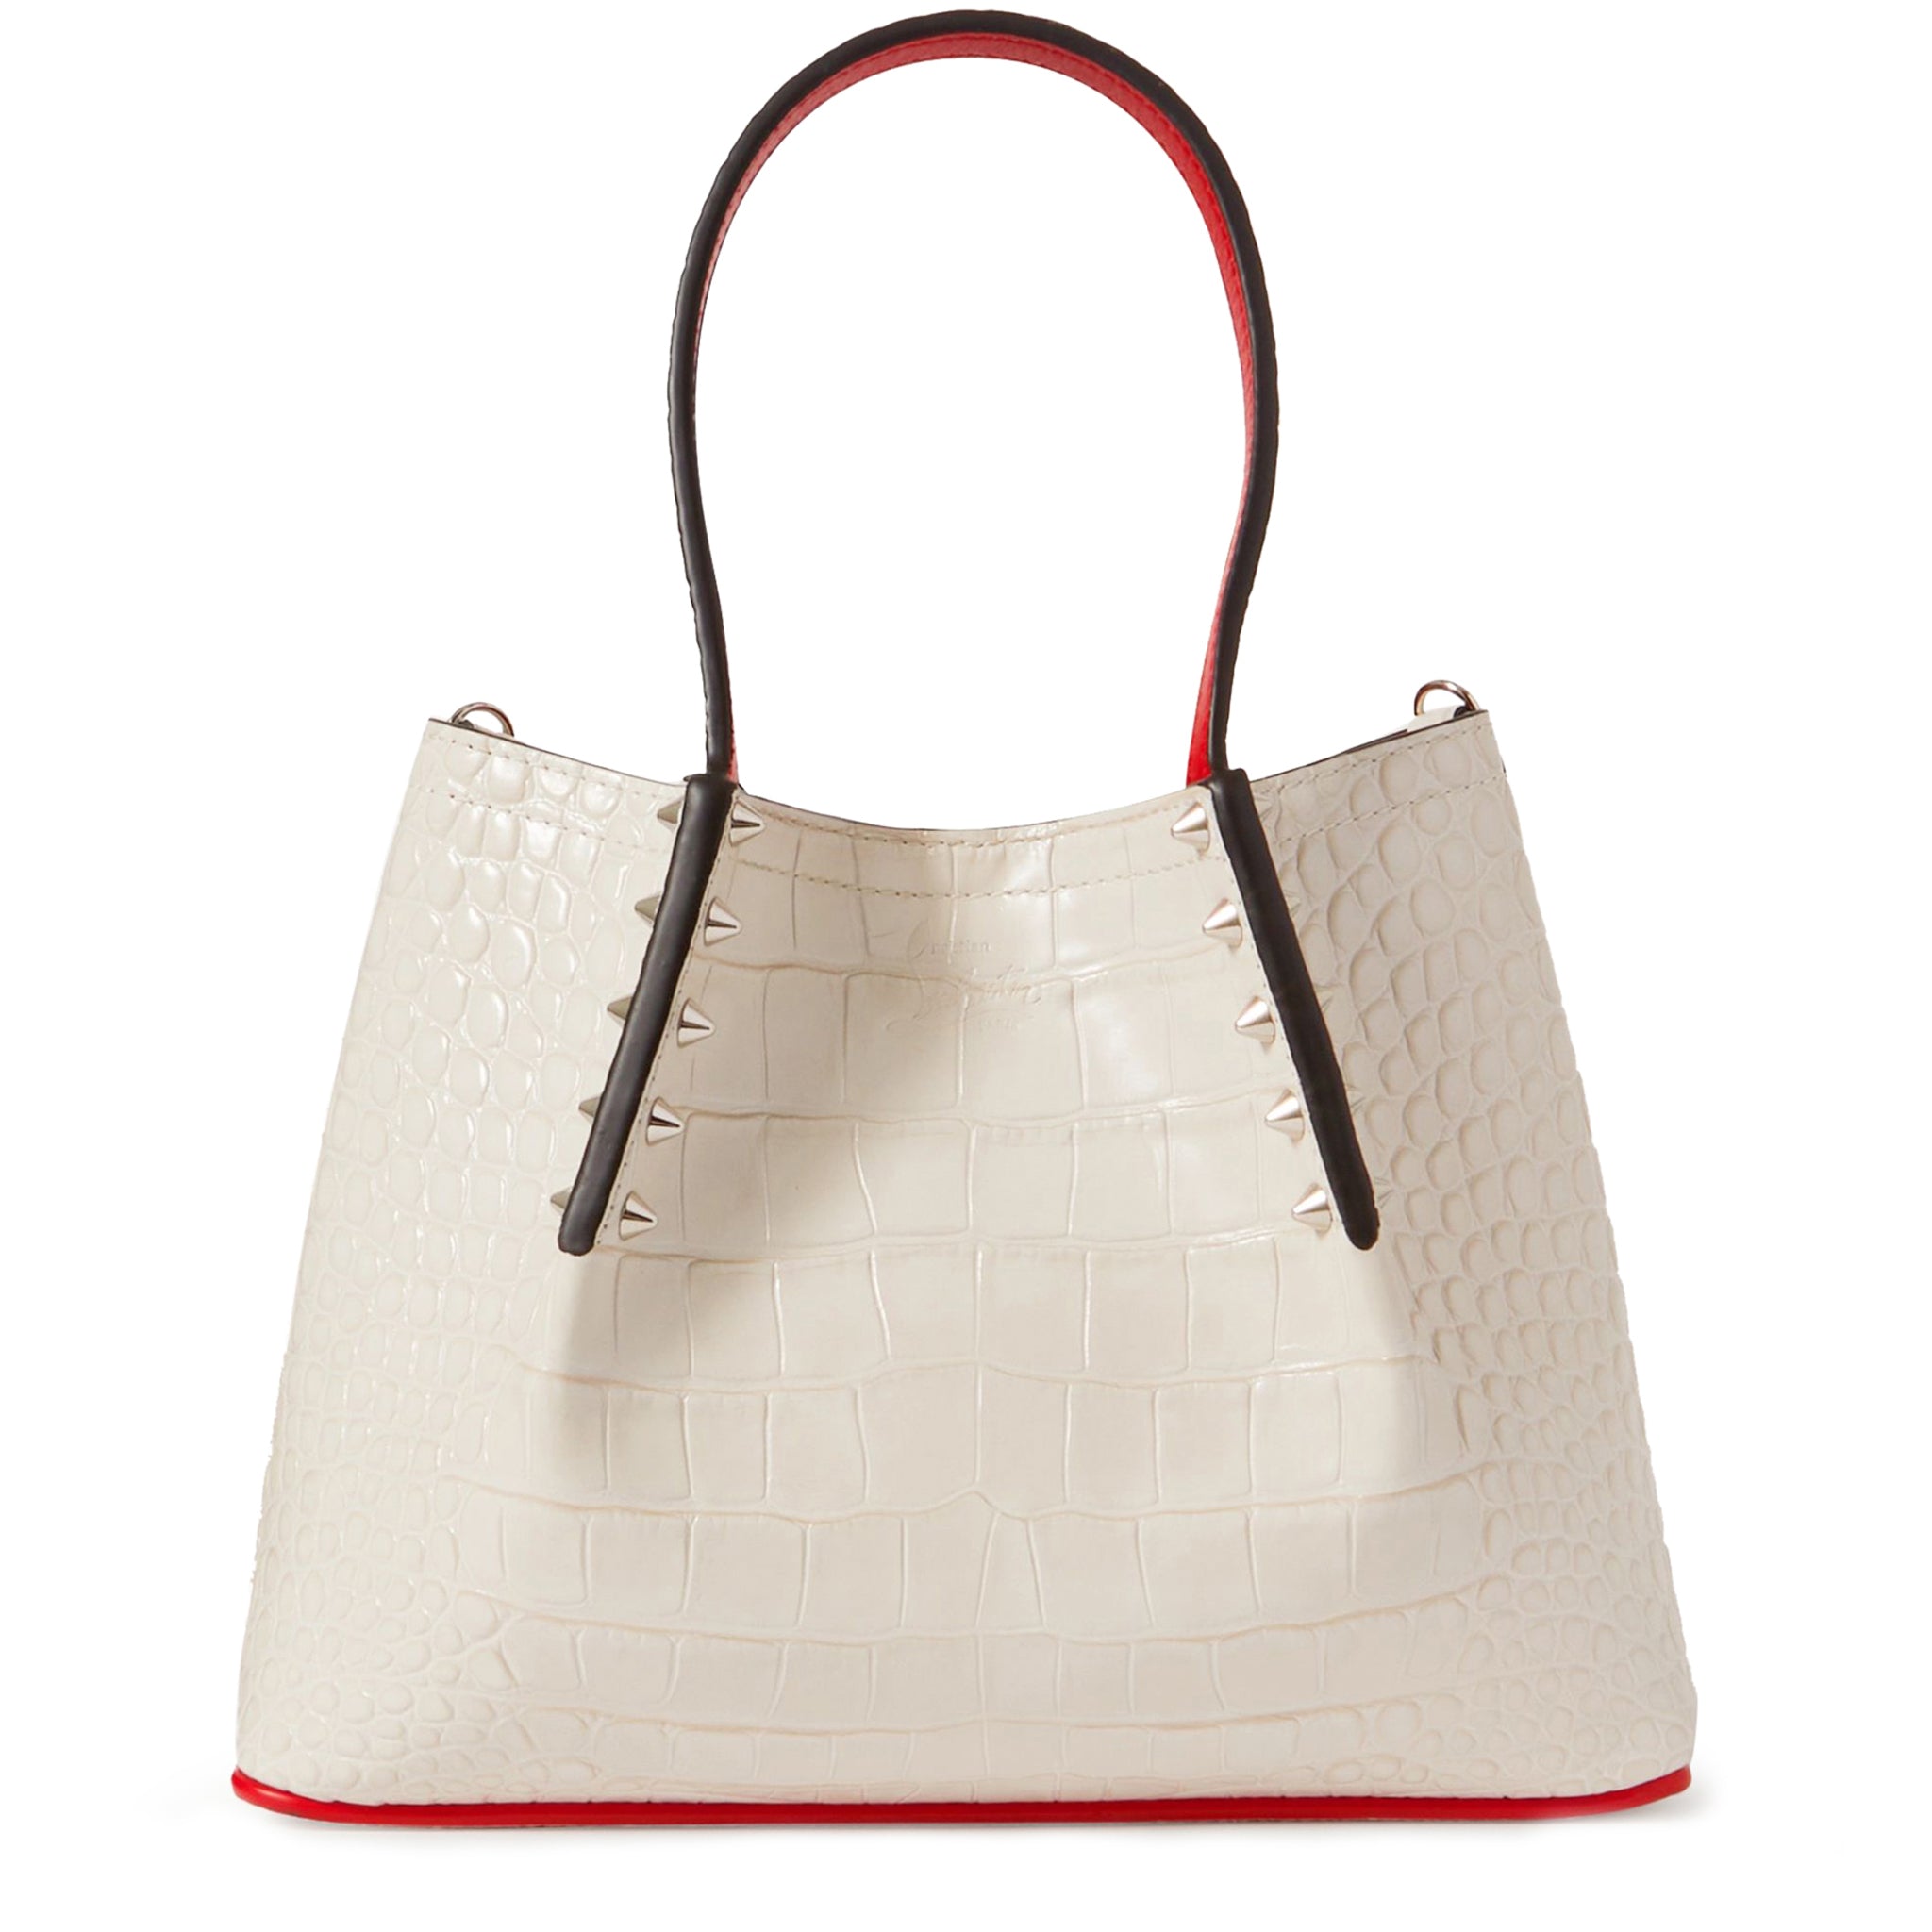 Totes bags Christian Louboutin - Cabarock Tote bag in white